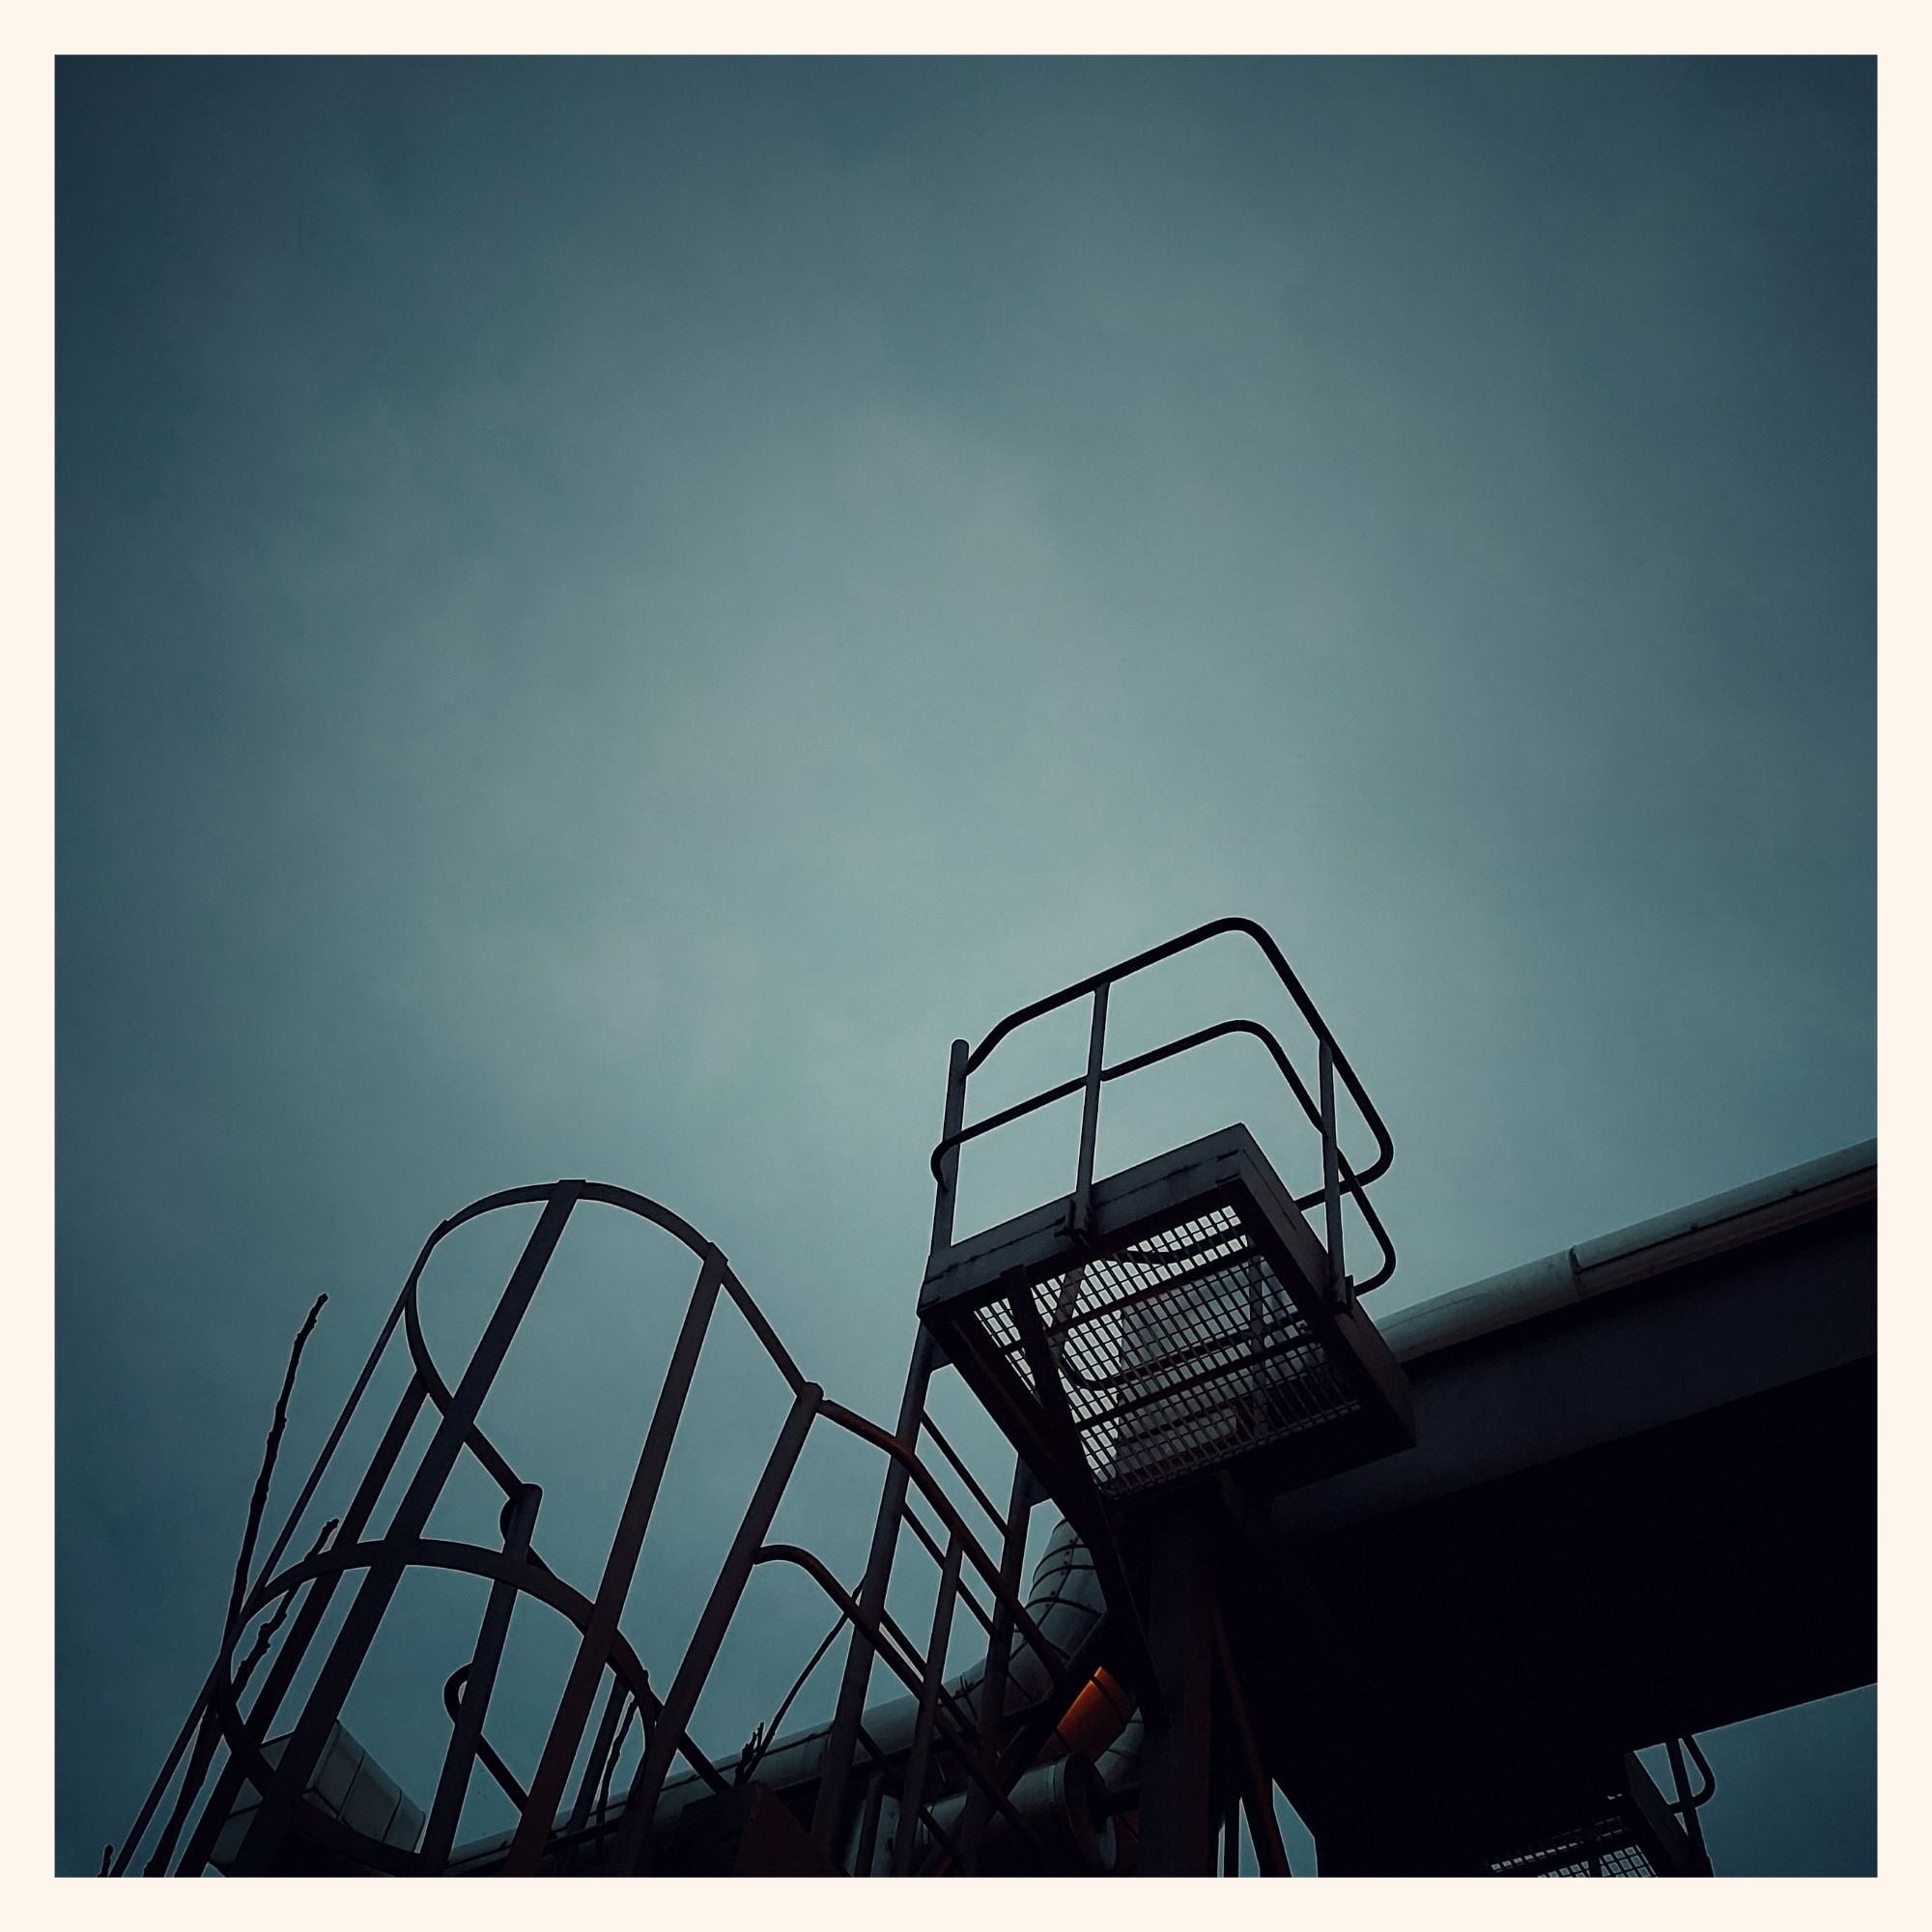 Grey sky above industrial construction. A ladder leading up to a steel bridge carrying pipes.